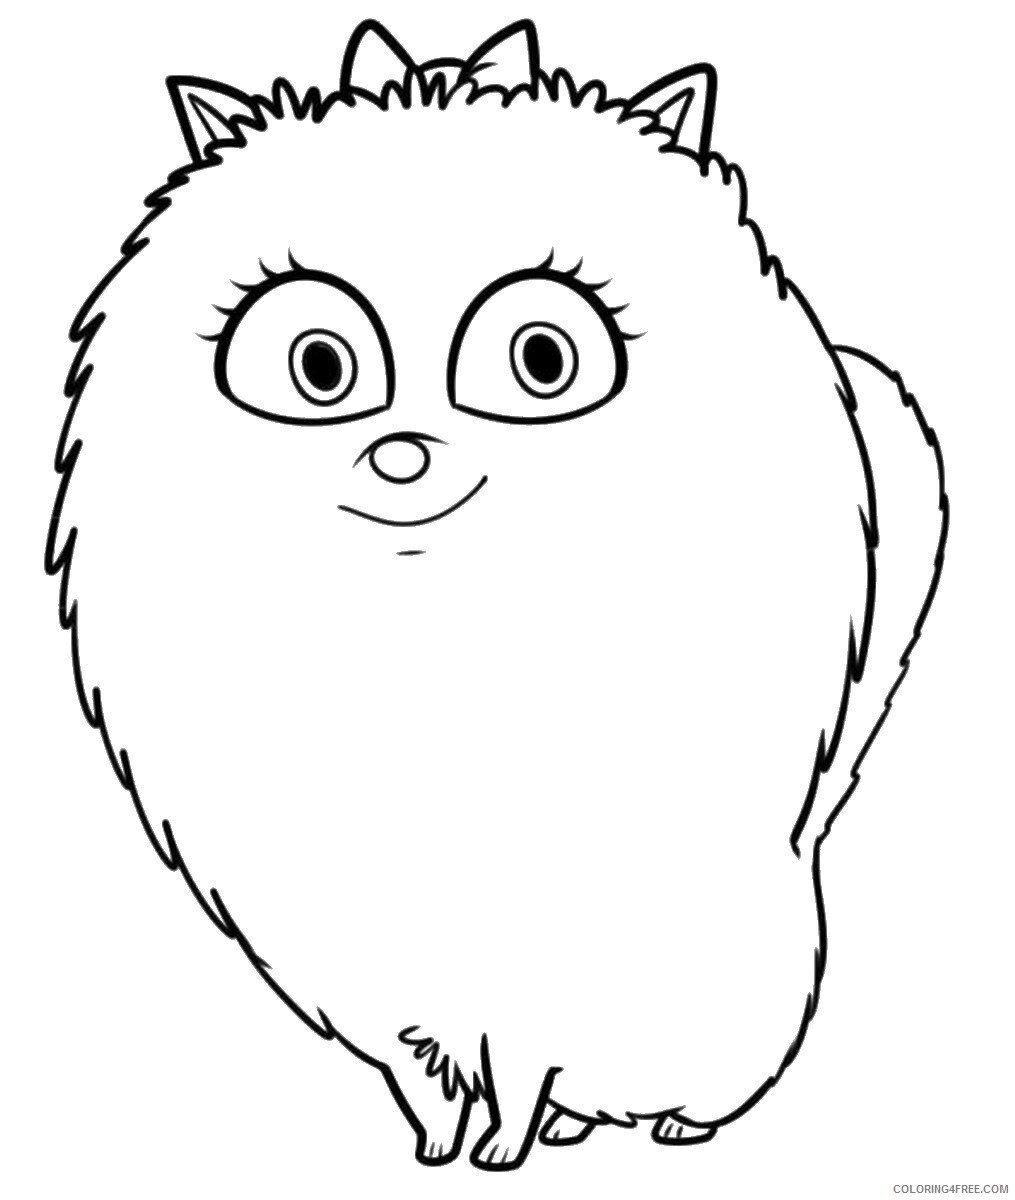 The Secret Life of Pets Coloring Pages TV Film Printable 2020 09505 Coloring4free